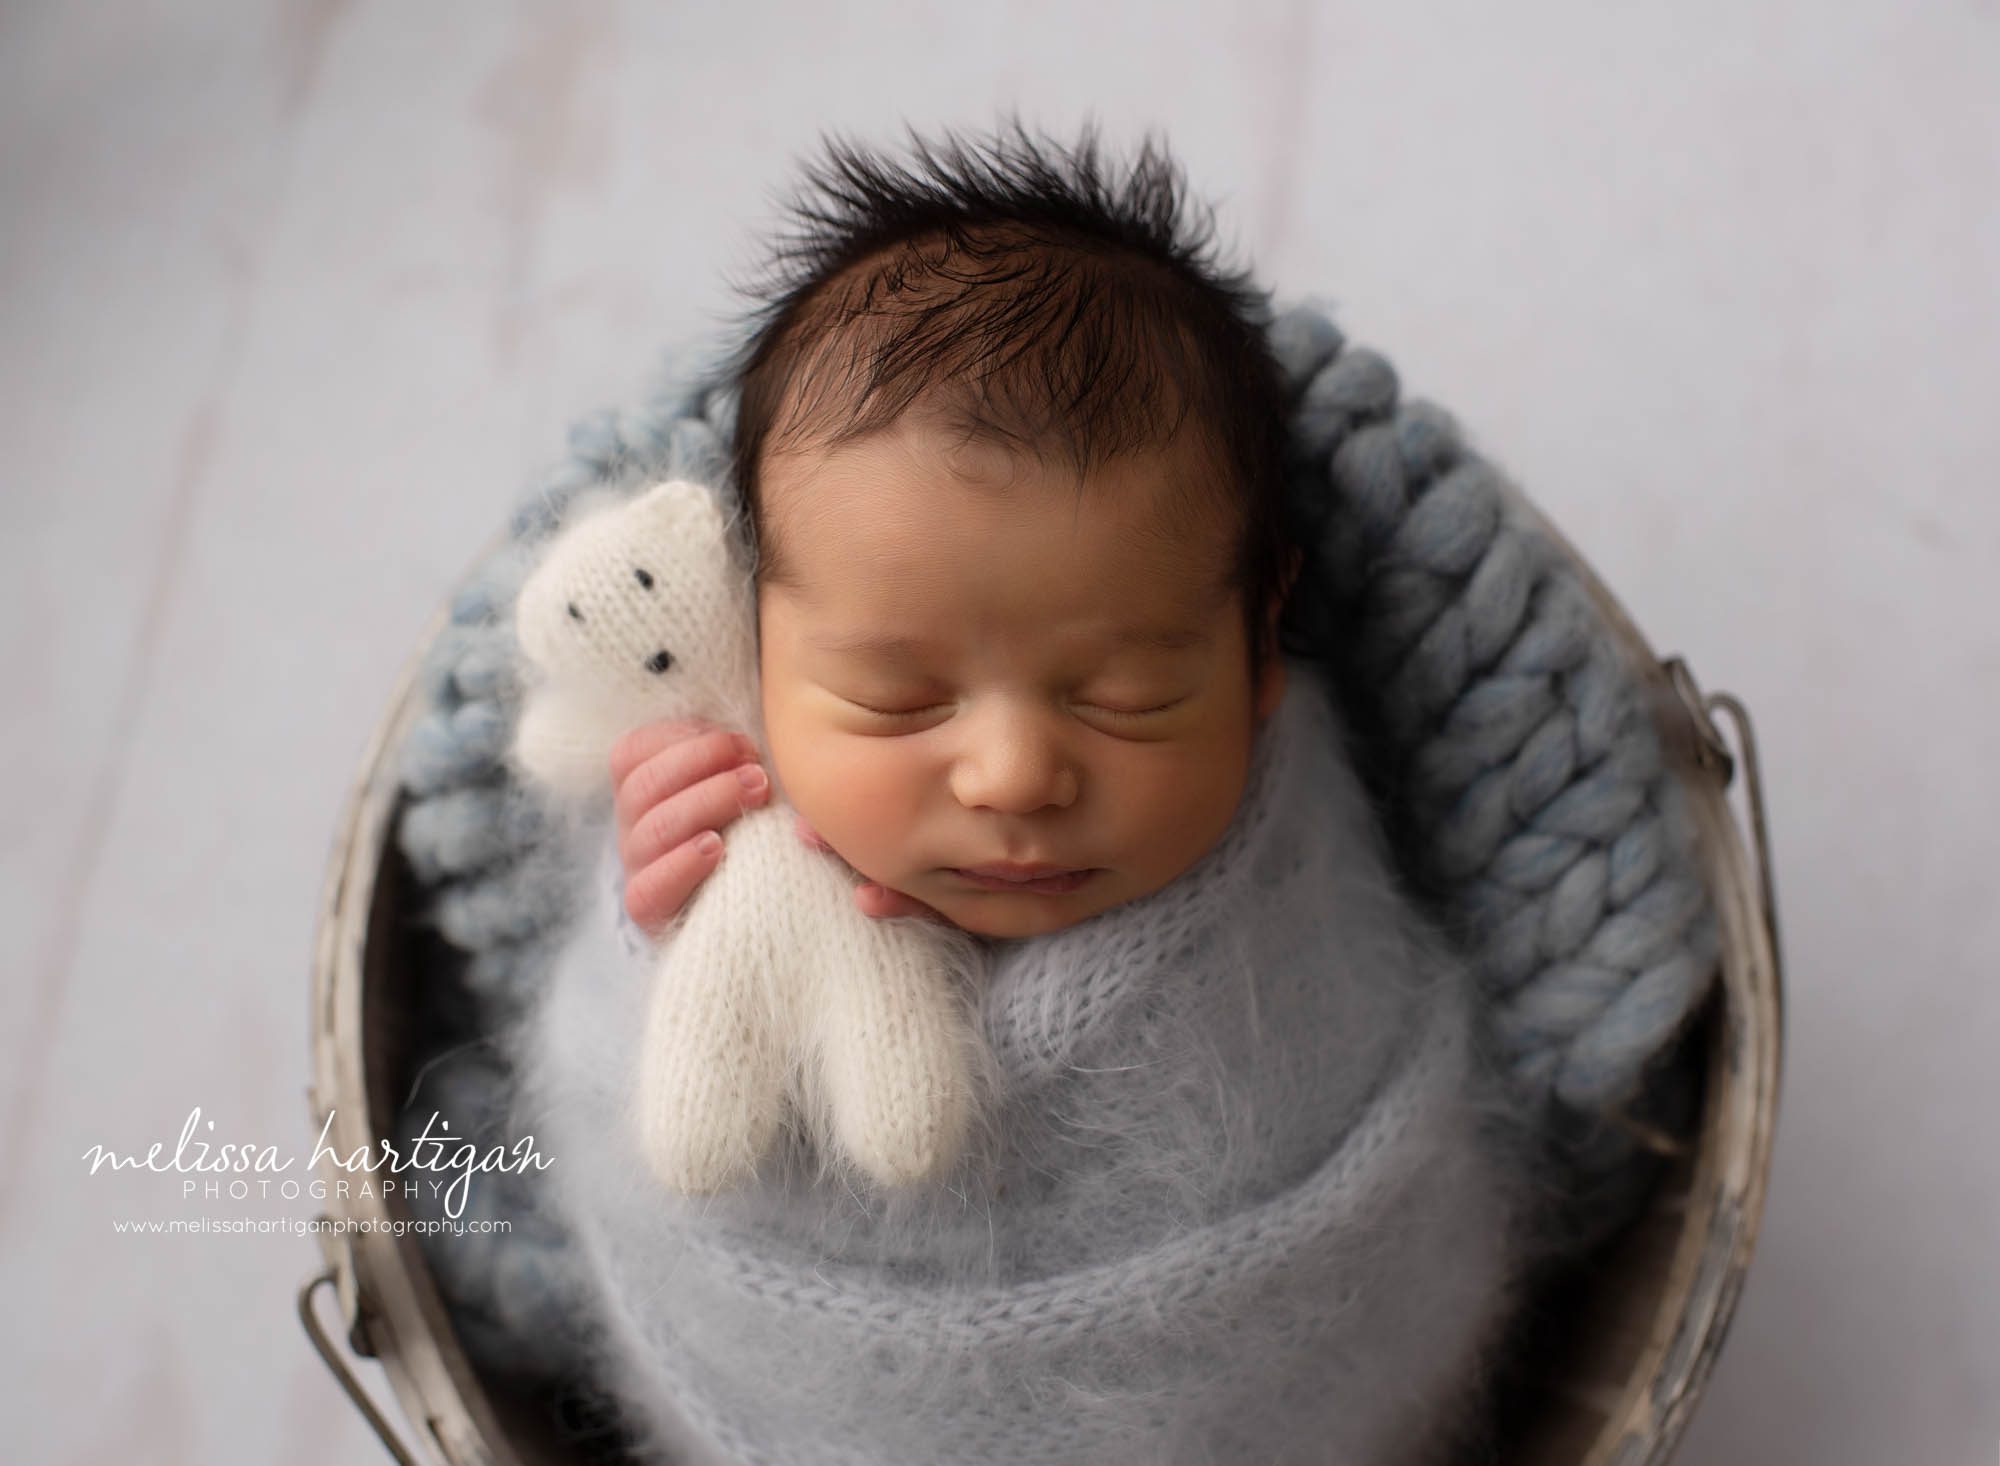 newborn boy wrapped in knitted gray wrap with cream colored knitted teddy bear posed in bucket